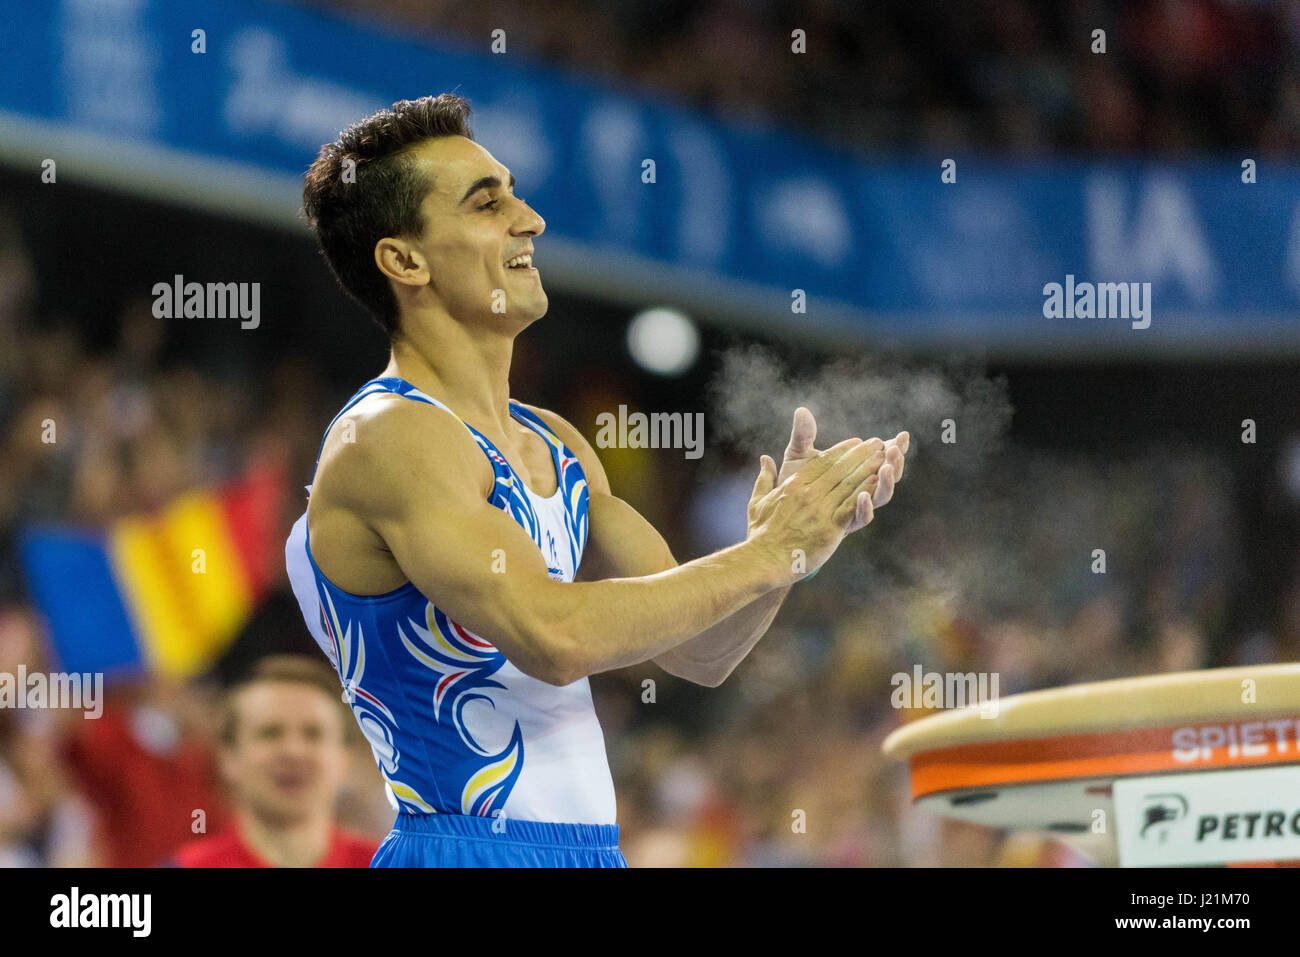 Cluj Napoca, Romania. 23rd Apr, 2017. Marian Dragulescu (ROU) after his performance on vault during the Men's Apparatus Finals at the European Men's and Women's Artistic Gymnastics Championships in Cluj Napoca, Romania. 23.04.2017 Photo: Catalin Soare/dpa/Alamy Live News Stock Photo